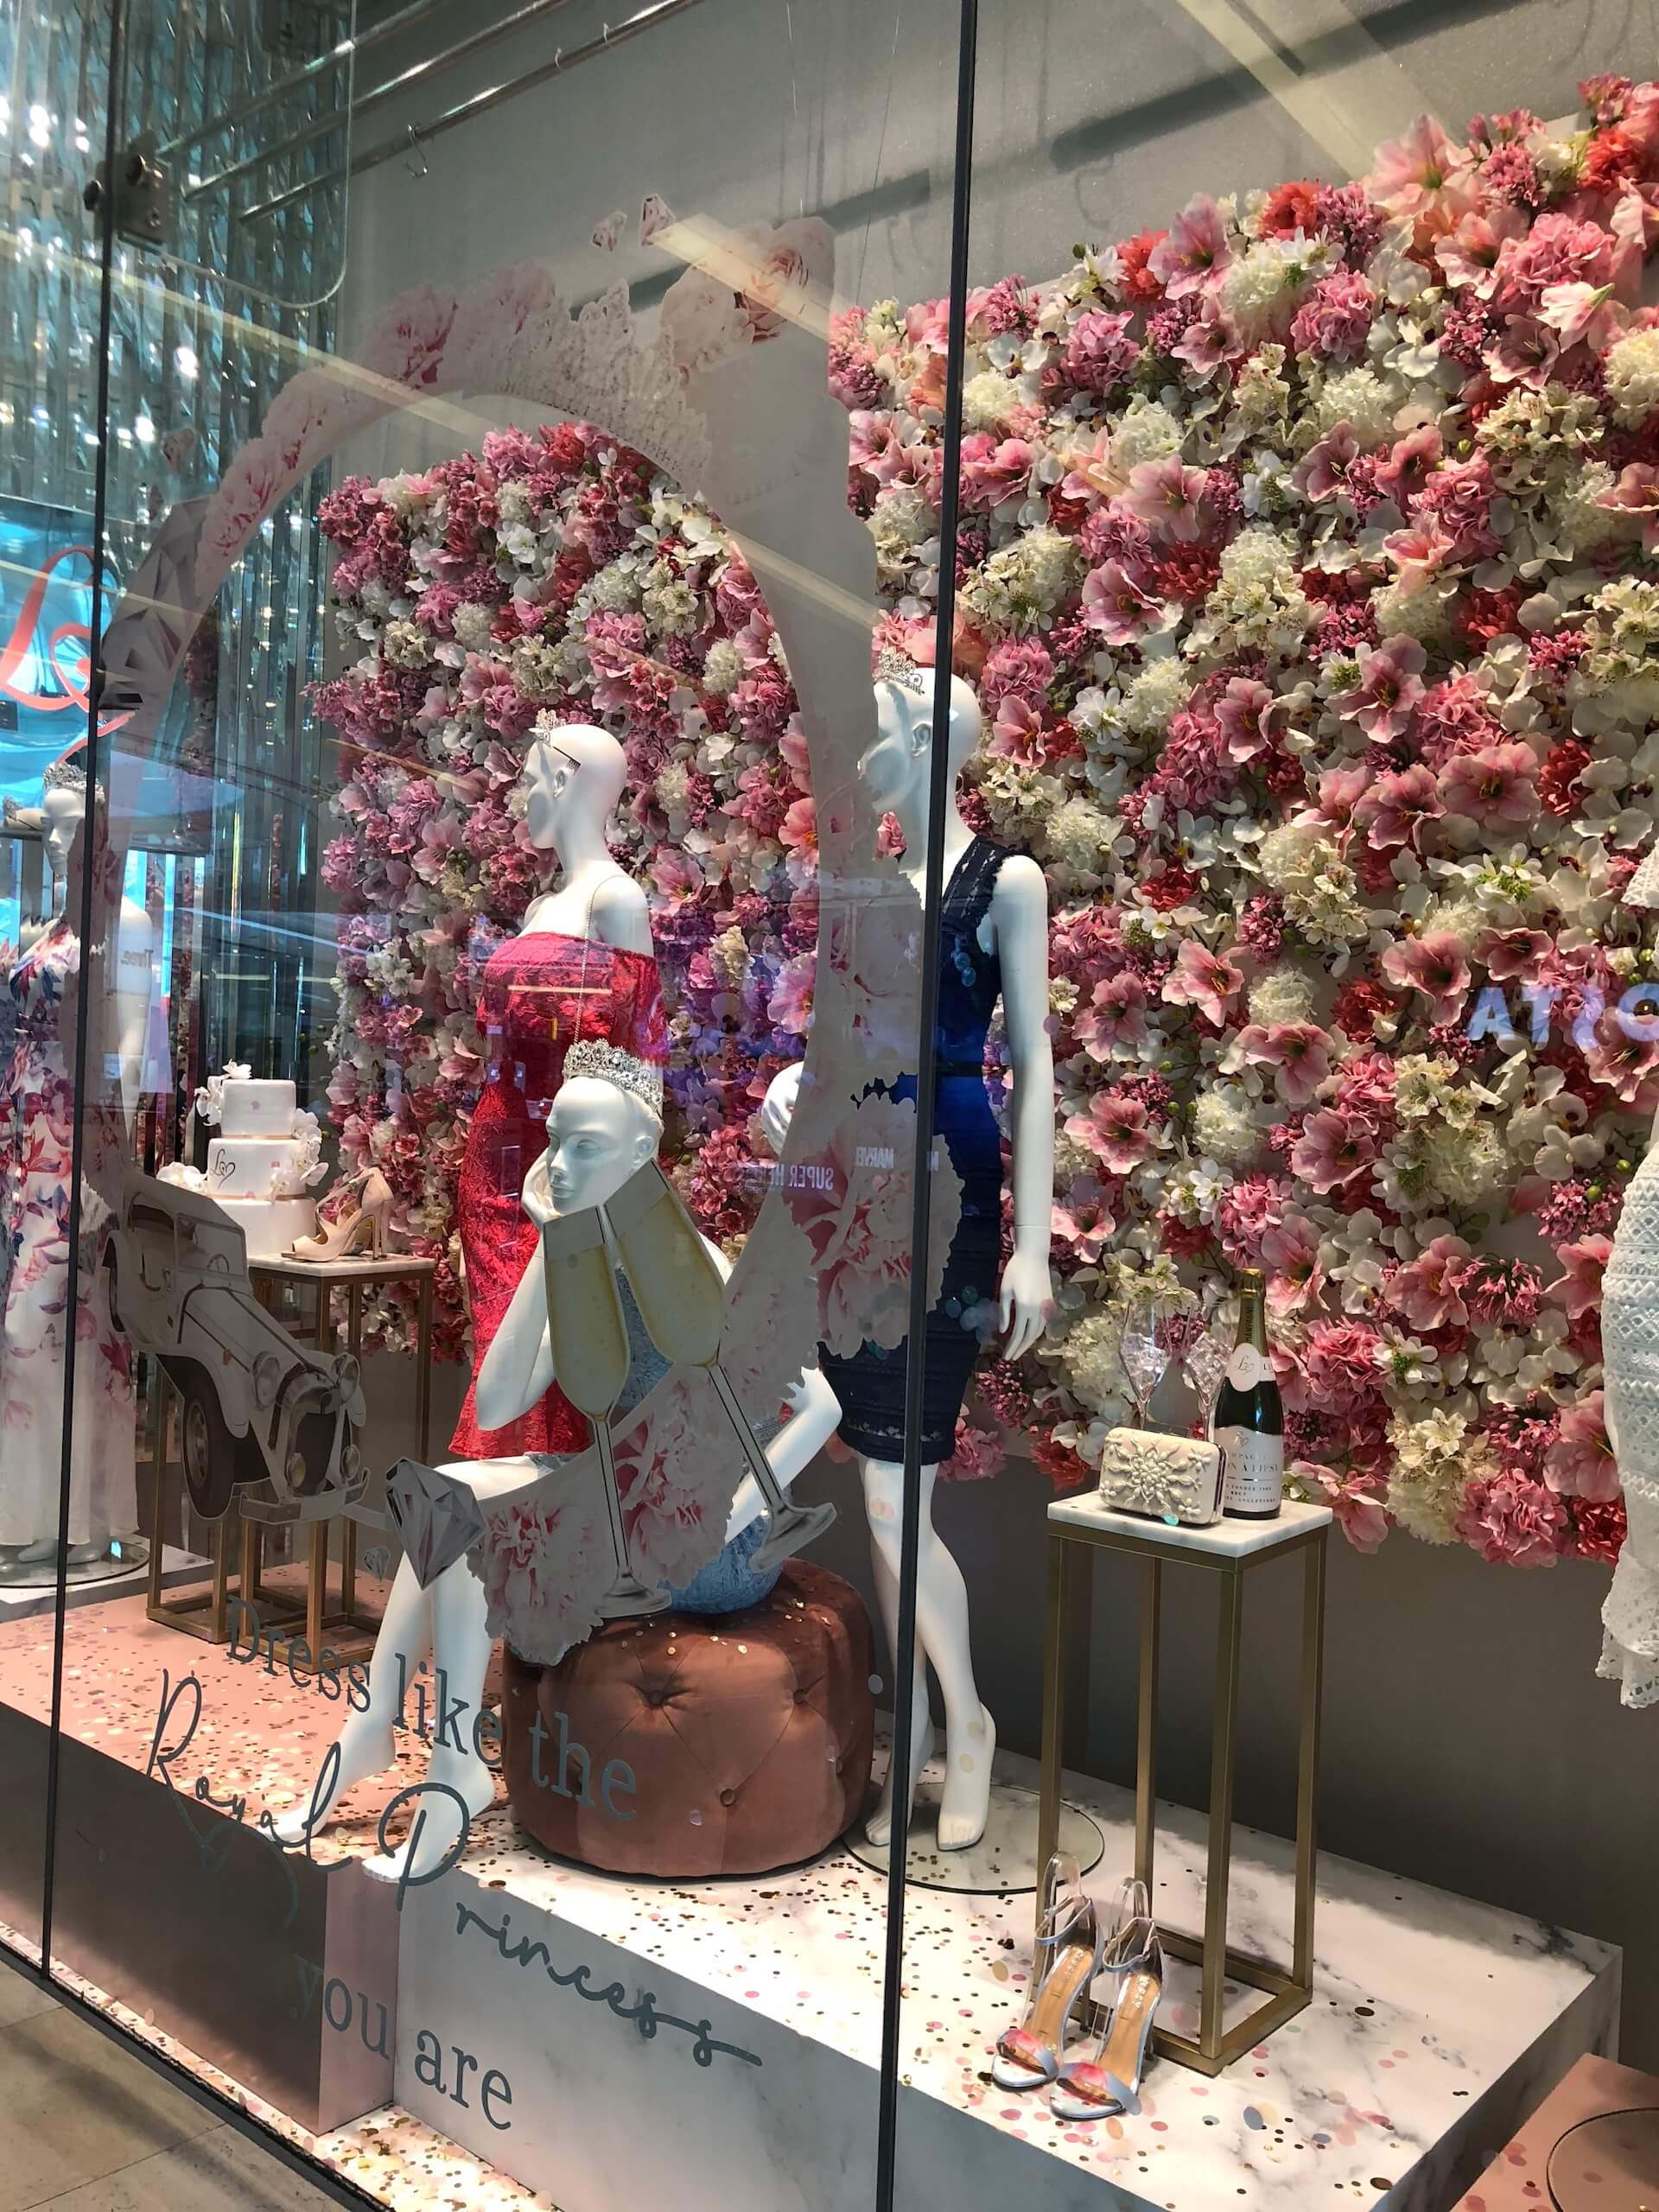 Lipsy fashion bespoke westfield flowers floral prop manufacture visual merchandising production window display